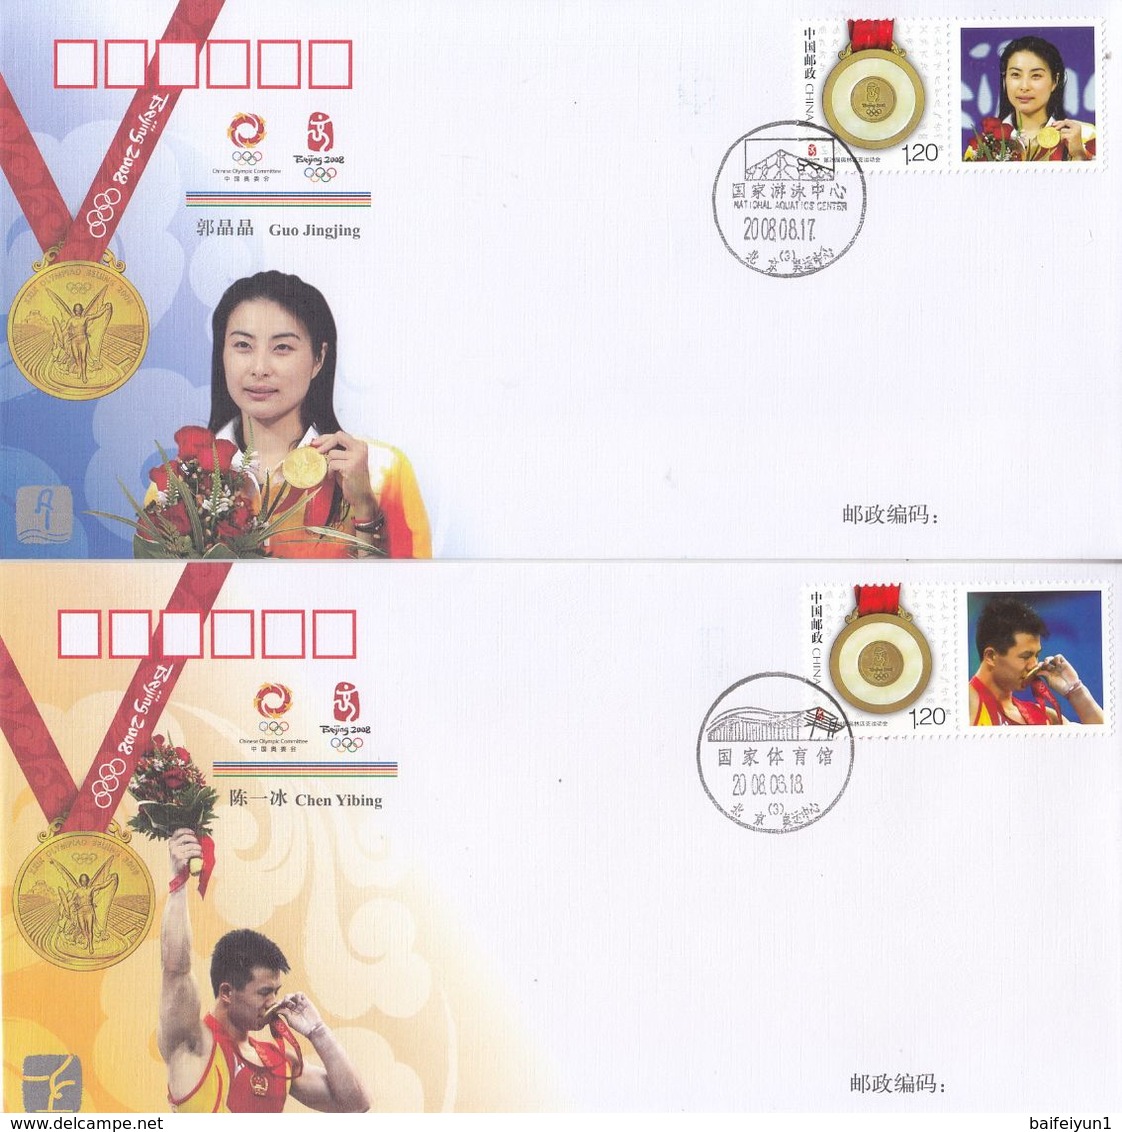 CHINA 2008 GPJF-1 BeiJing Olympic 2008 China Gold Medal winner Special S/S Stamp 51  Covers